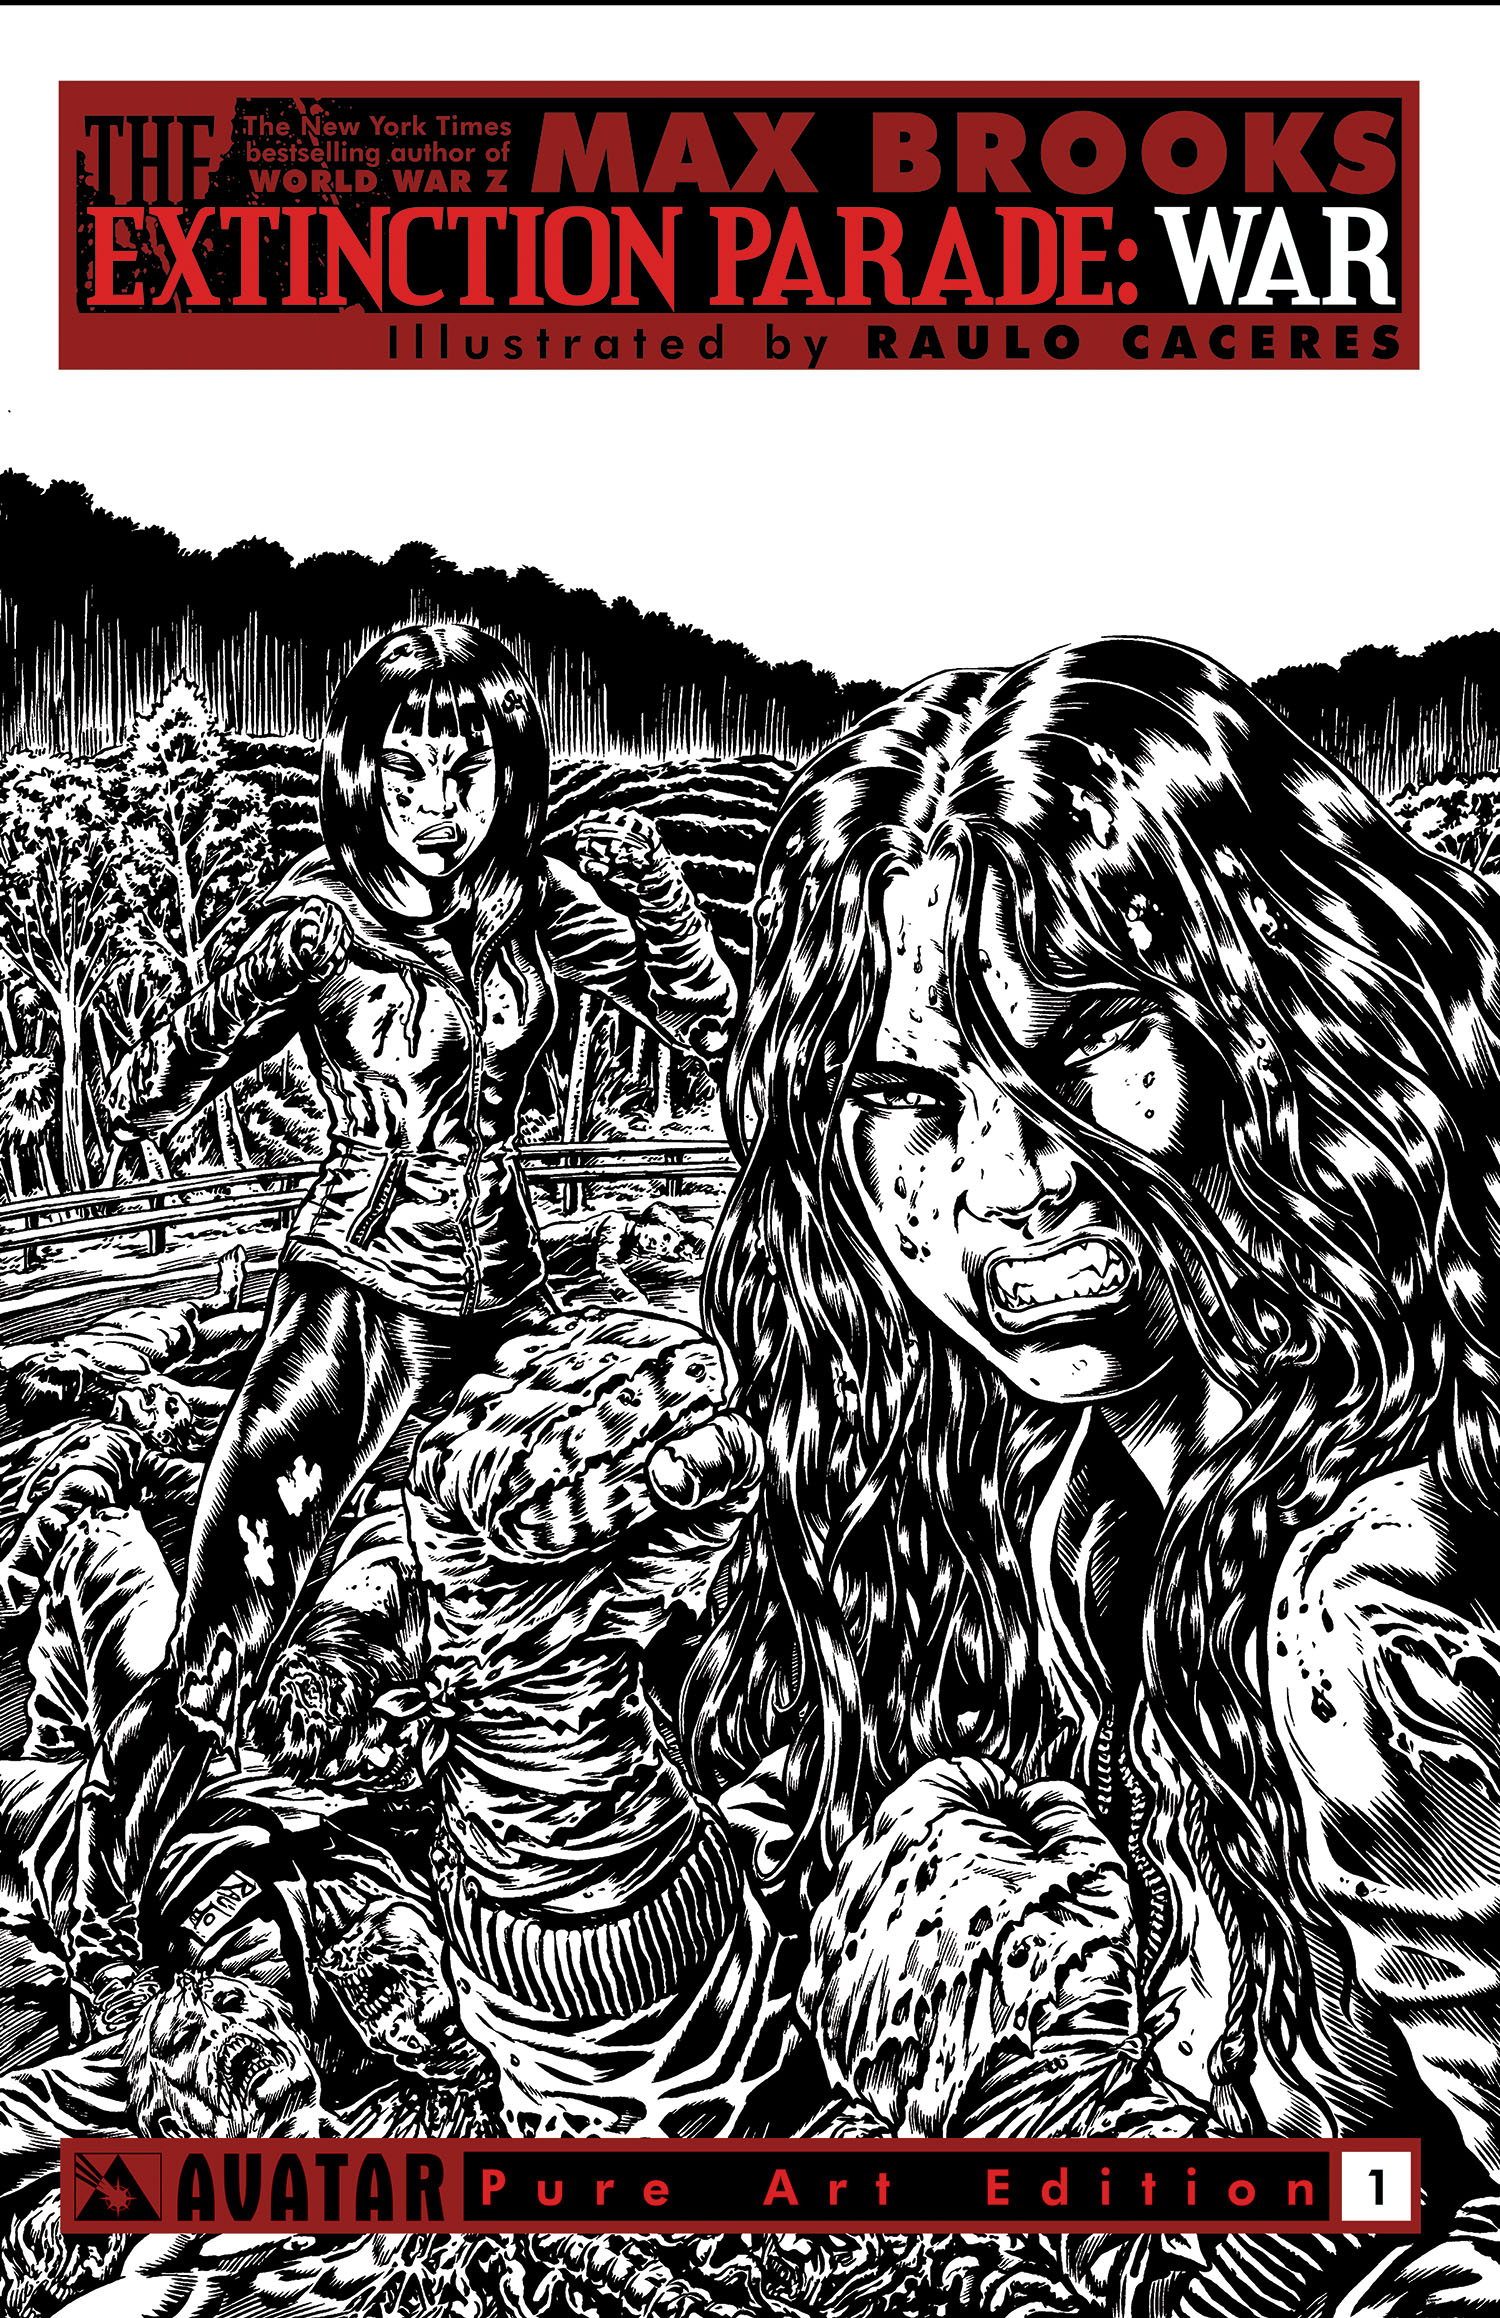 Read online The Extinction Parade: War comic -  Issue #1 - 2